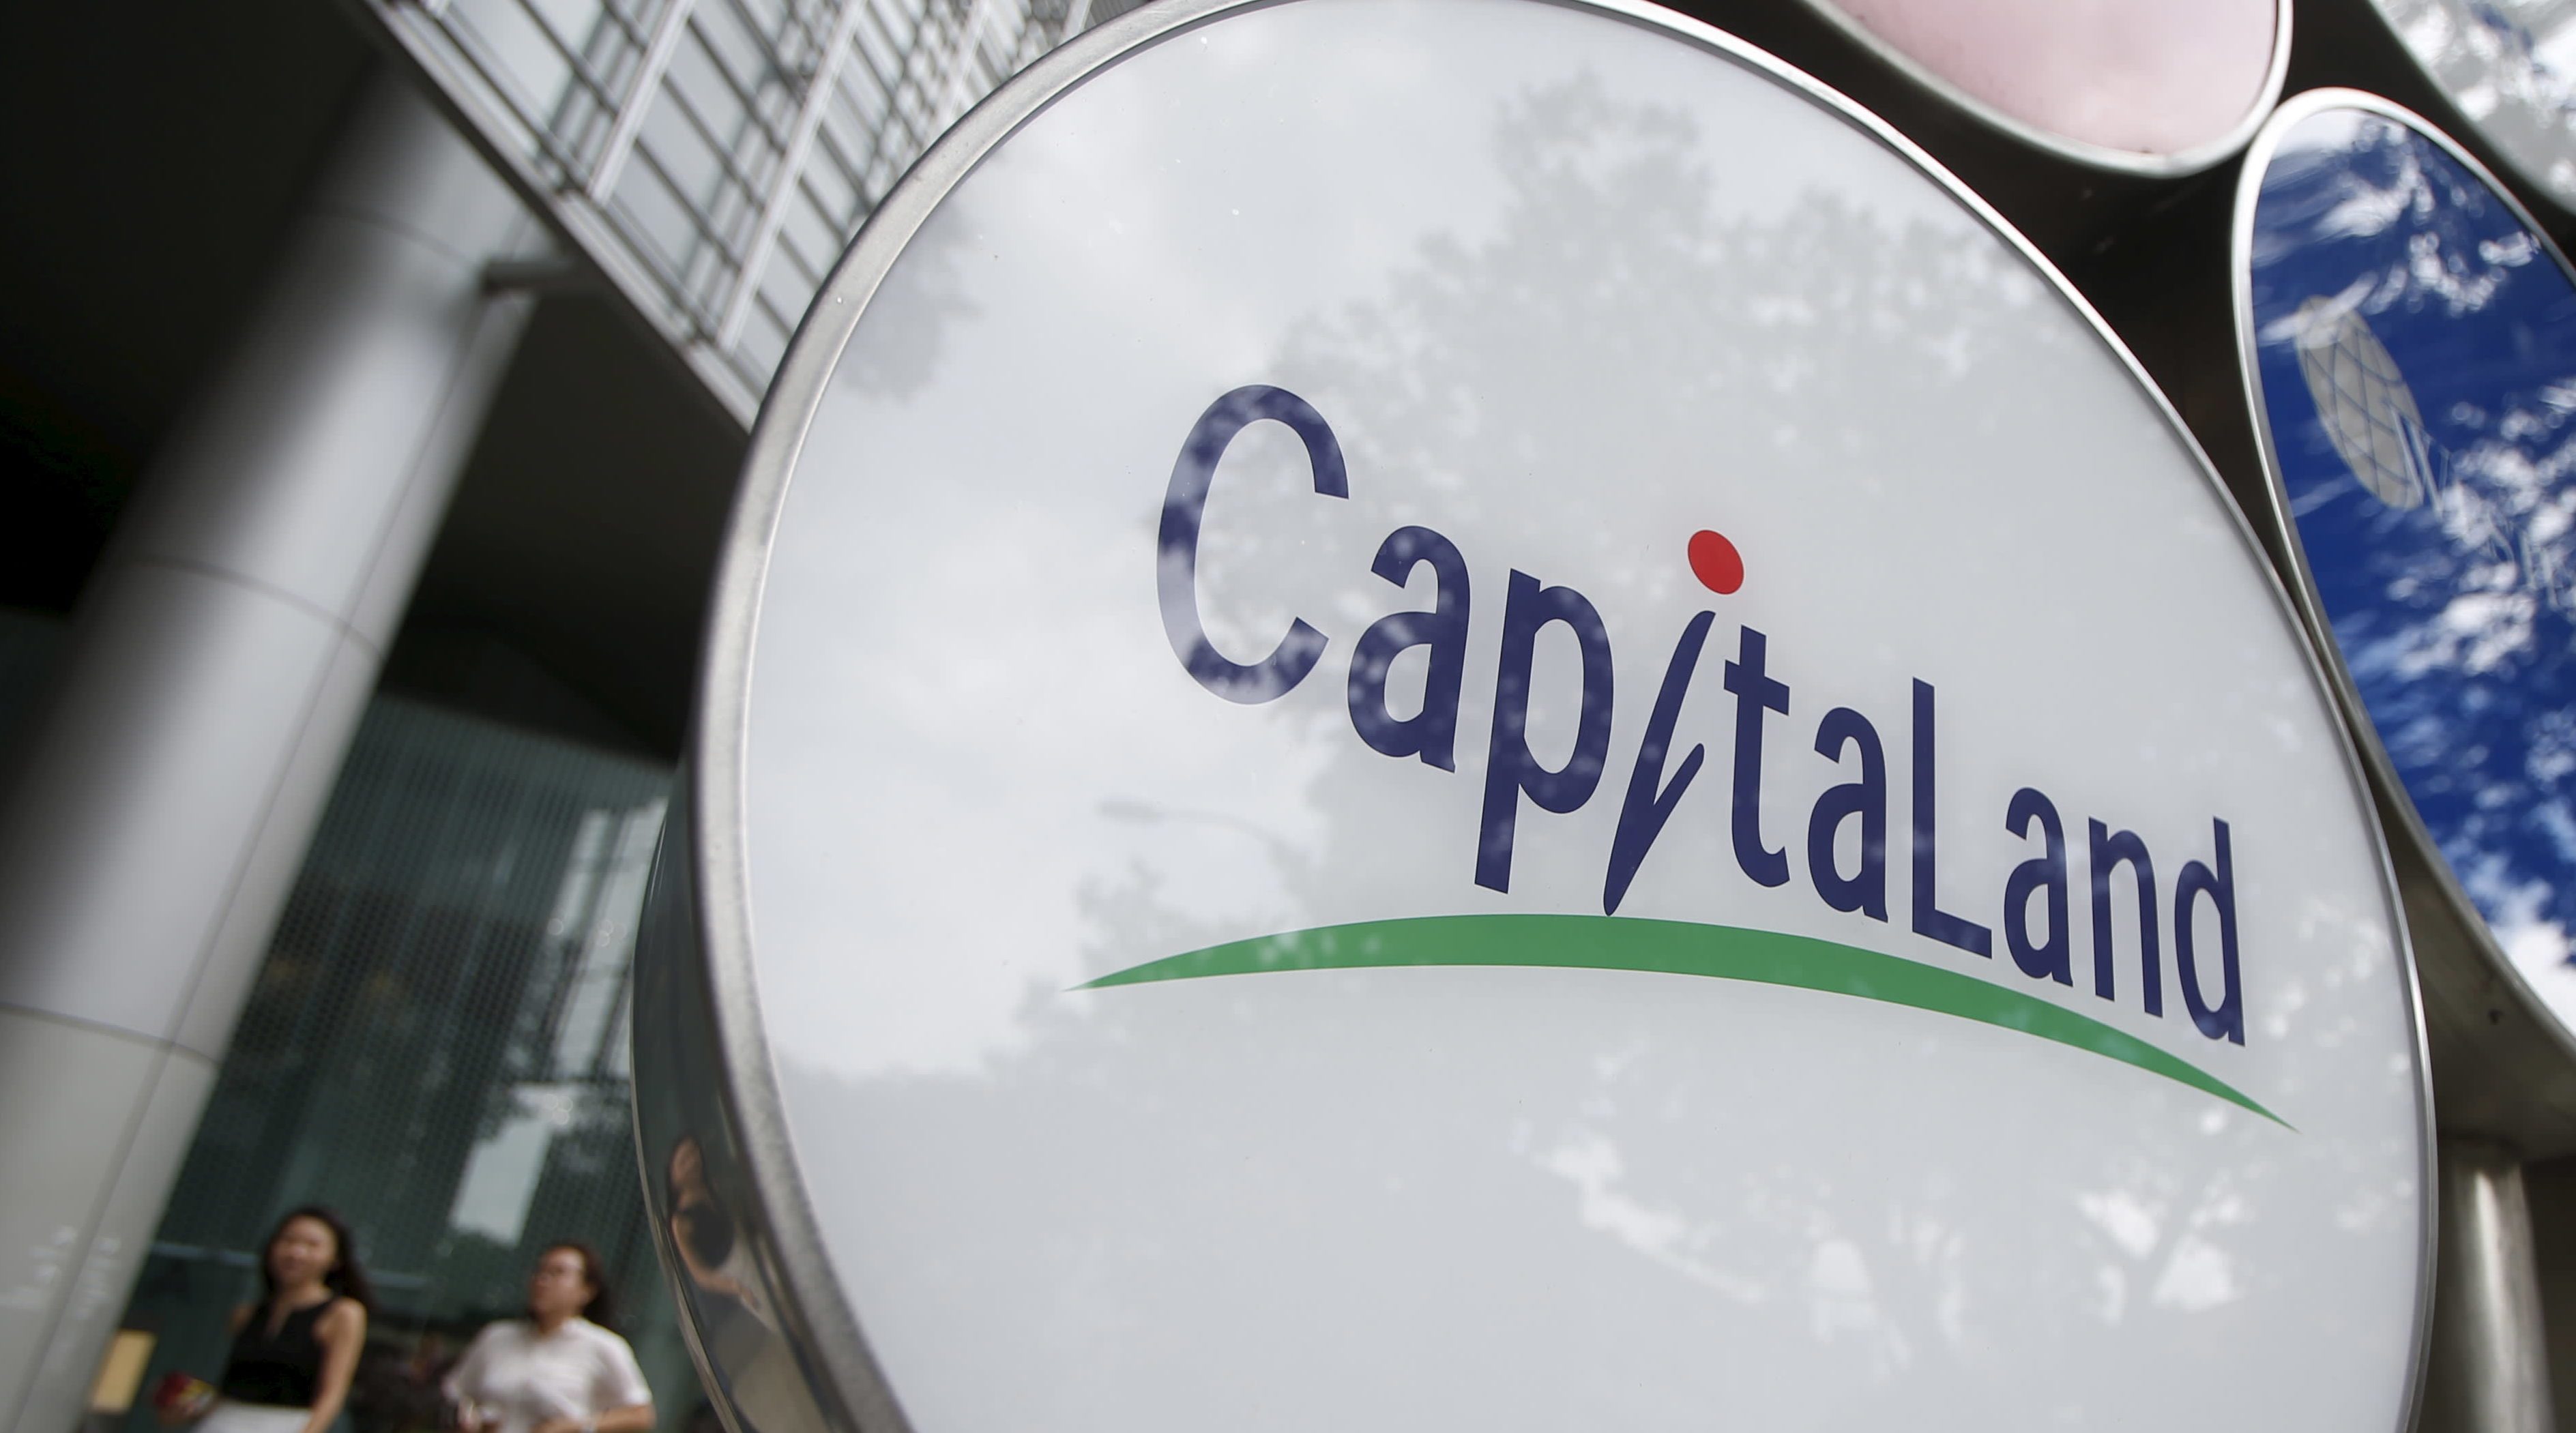 Singapore's CapitaLand to divest interest in three China malls for $427m